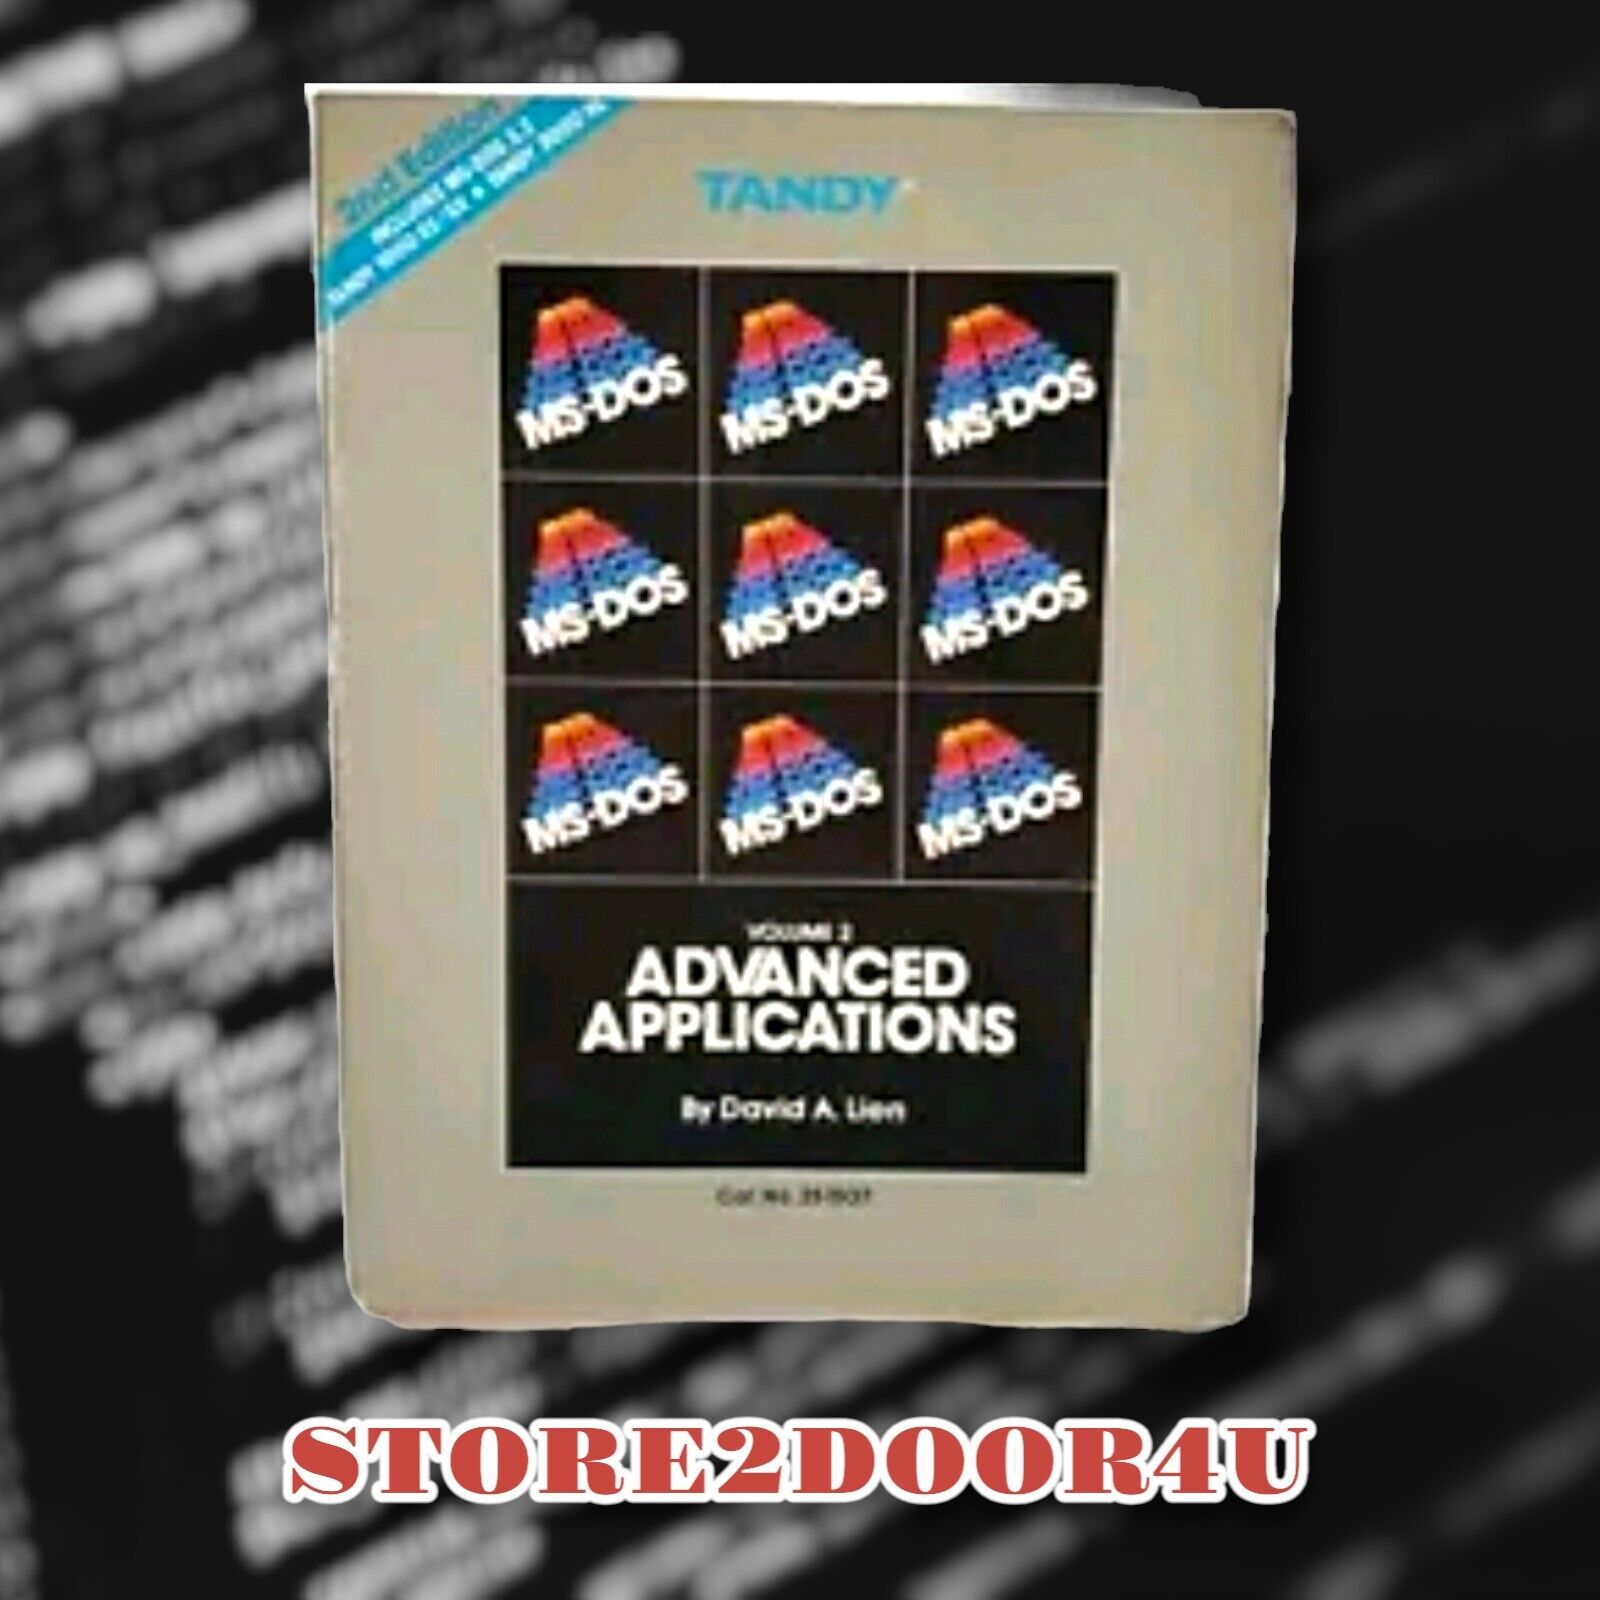 Tandy MS-DOS Volume 2 Advance Applications 2nd Edition By David A. Lien